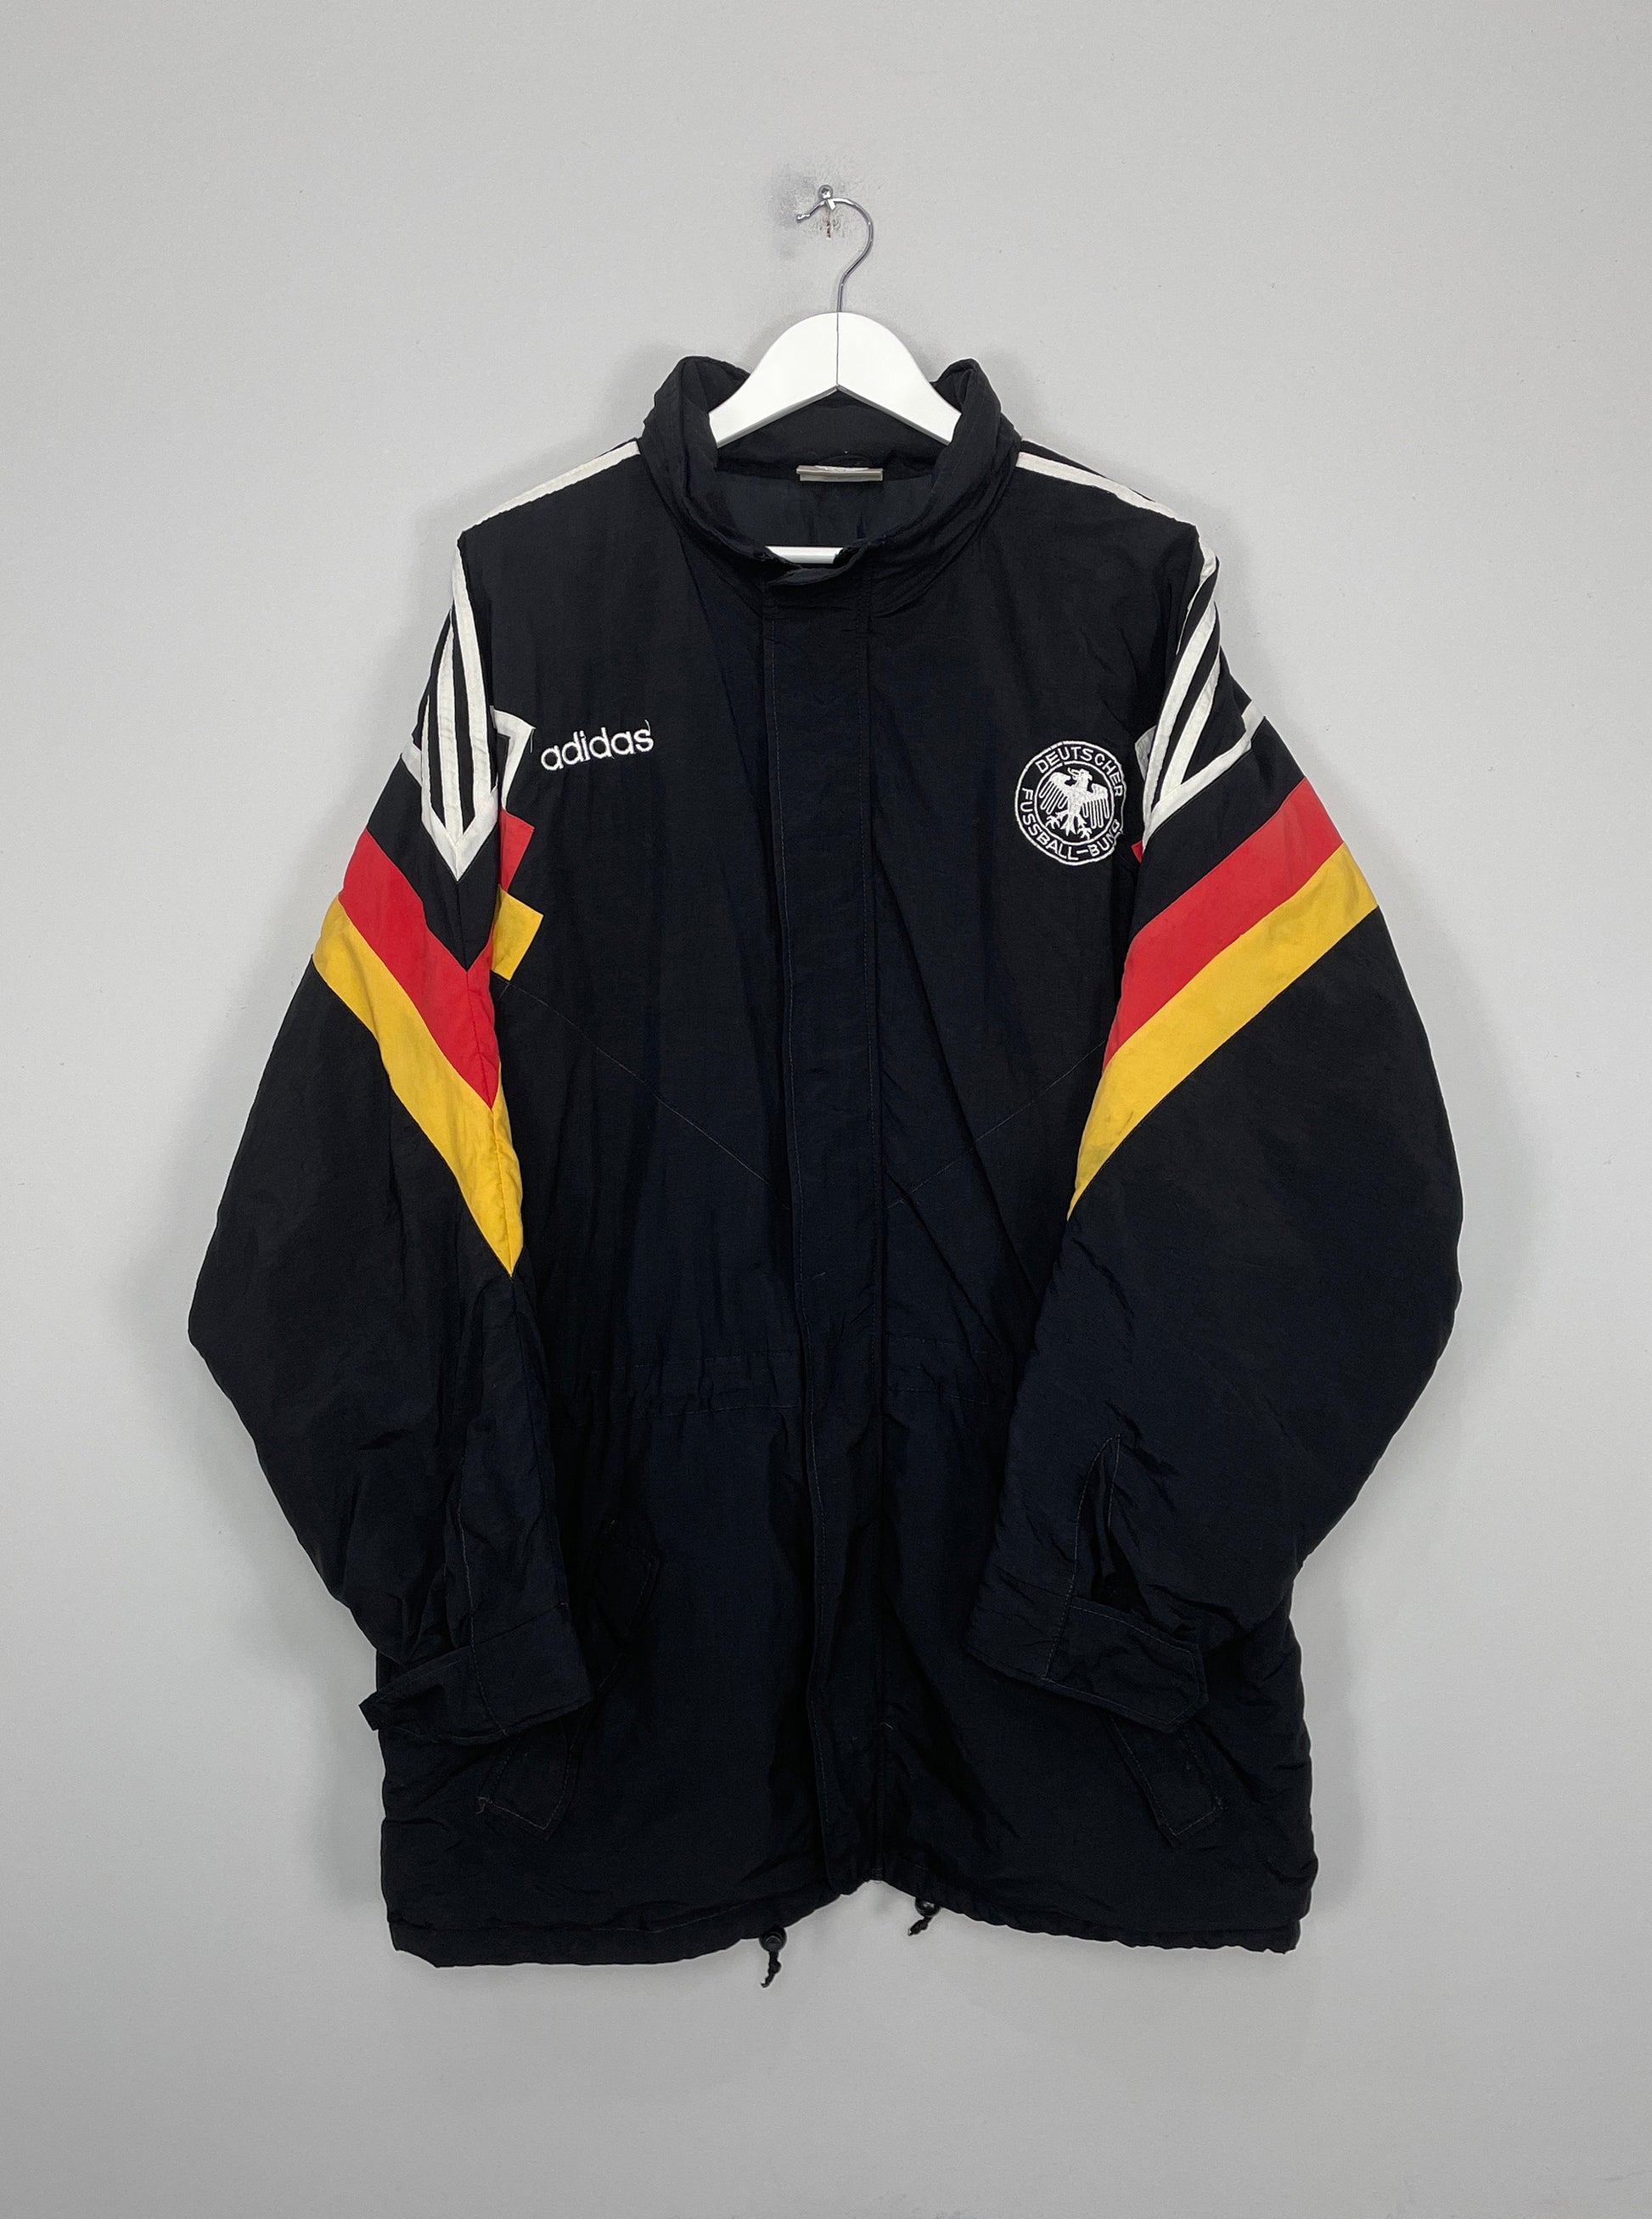 Image of the Germany bench coat from the 1992/94 season